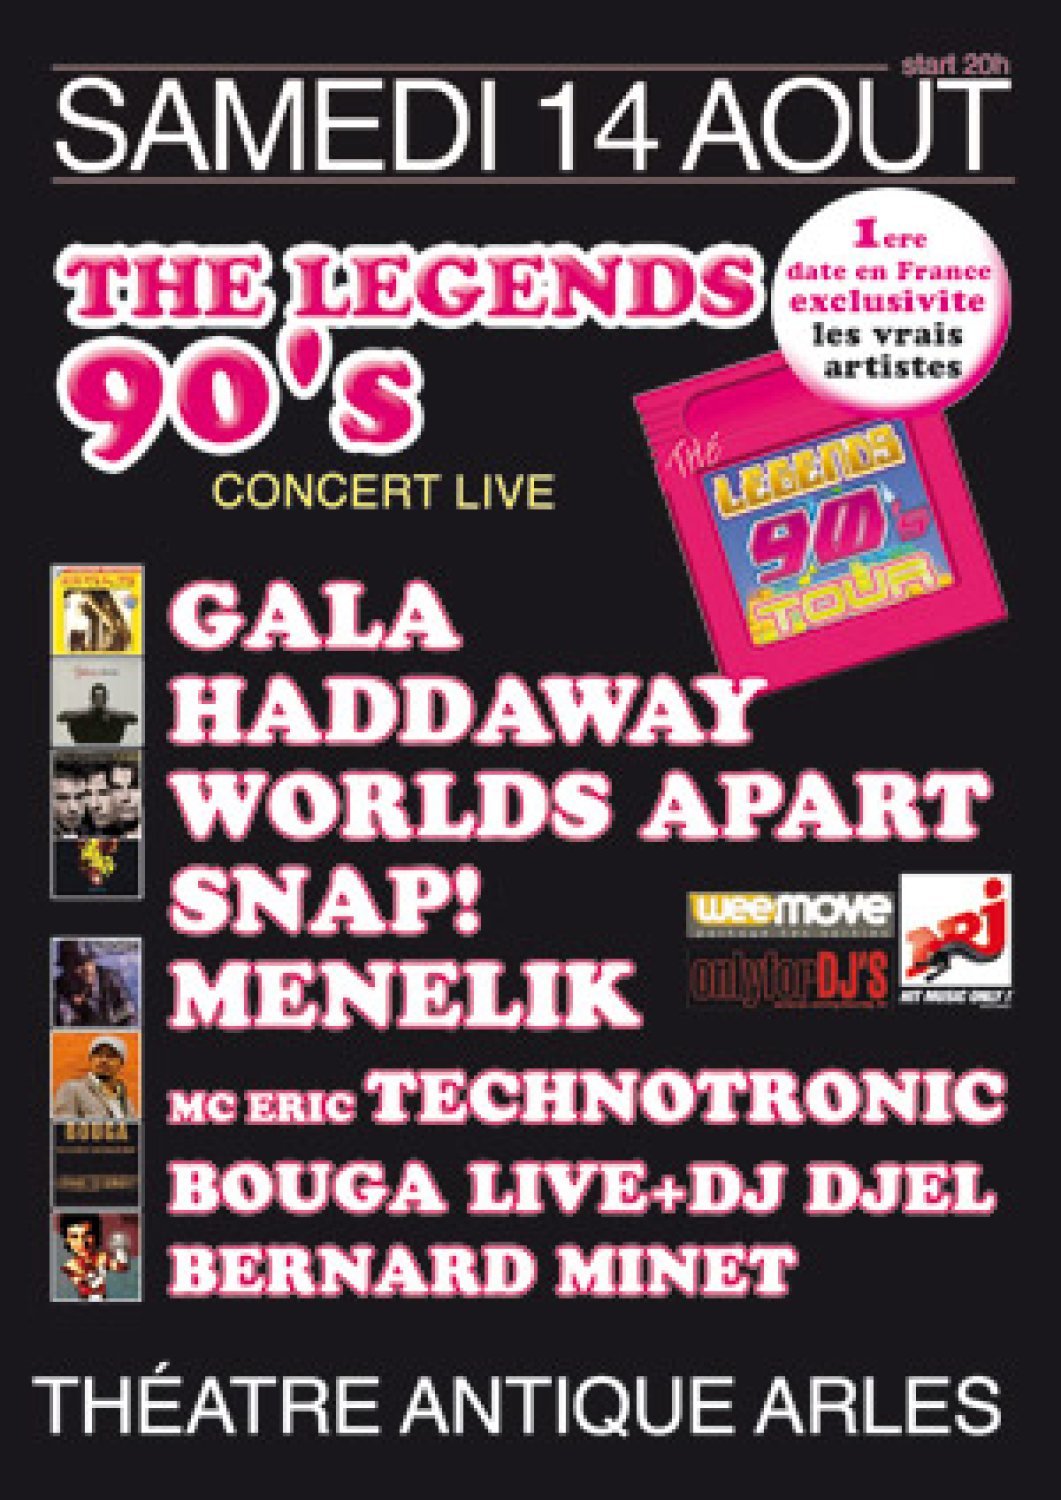 The legends 90s (Arles - 2010)